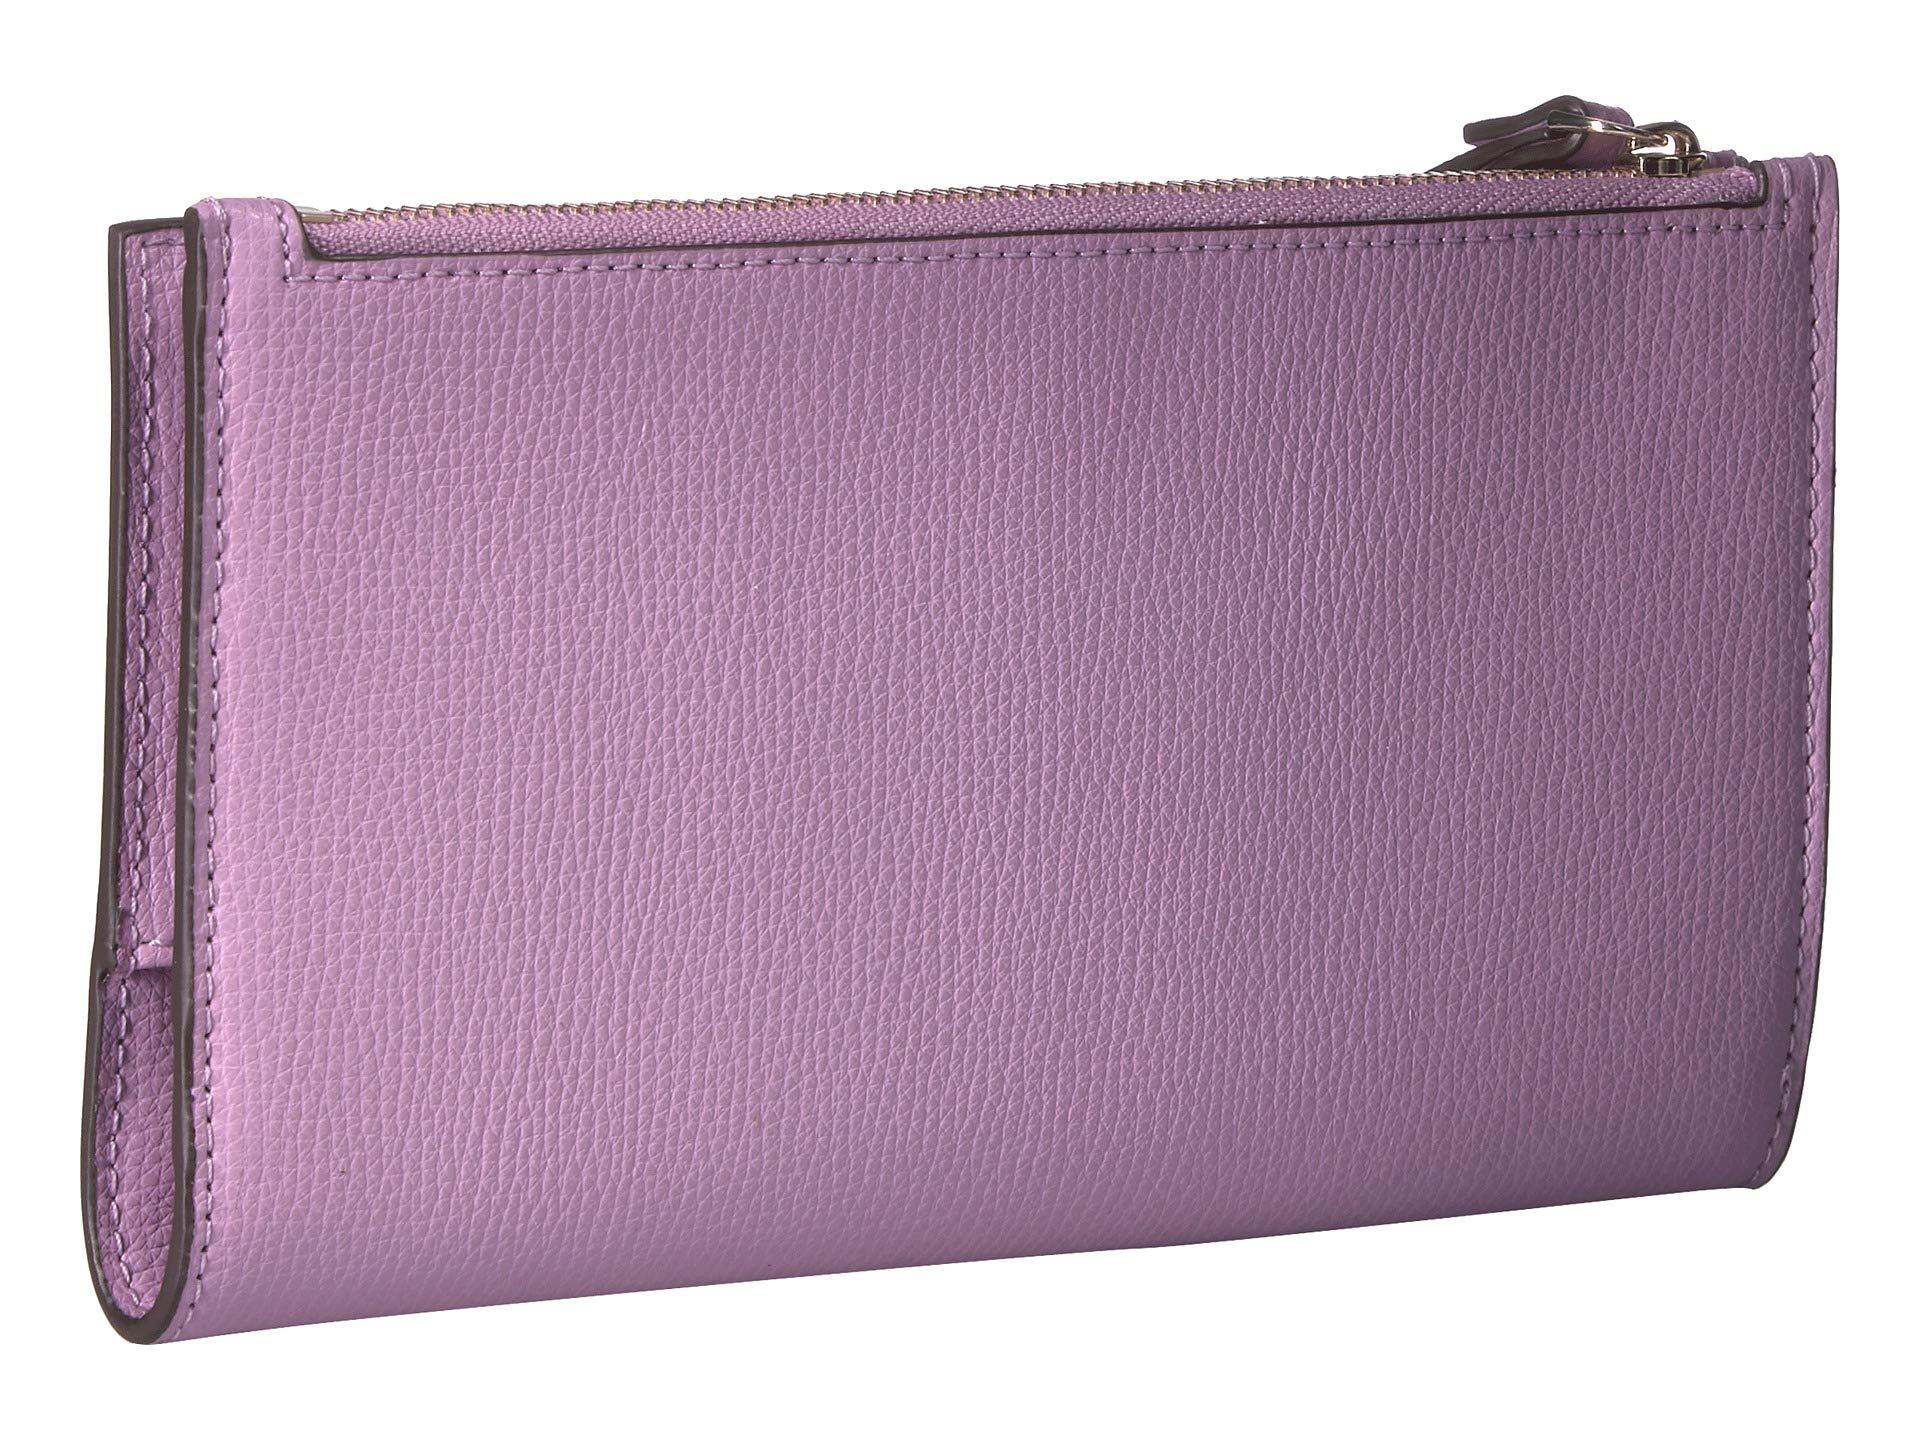 Kate Spade Sylvia Large Continental Wristlet in Purple - Lyst